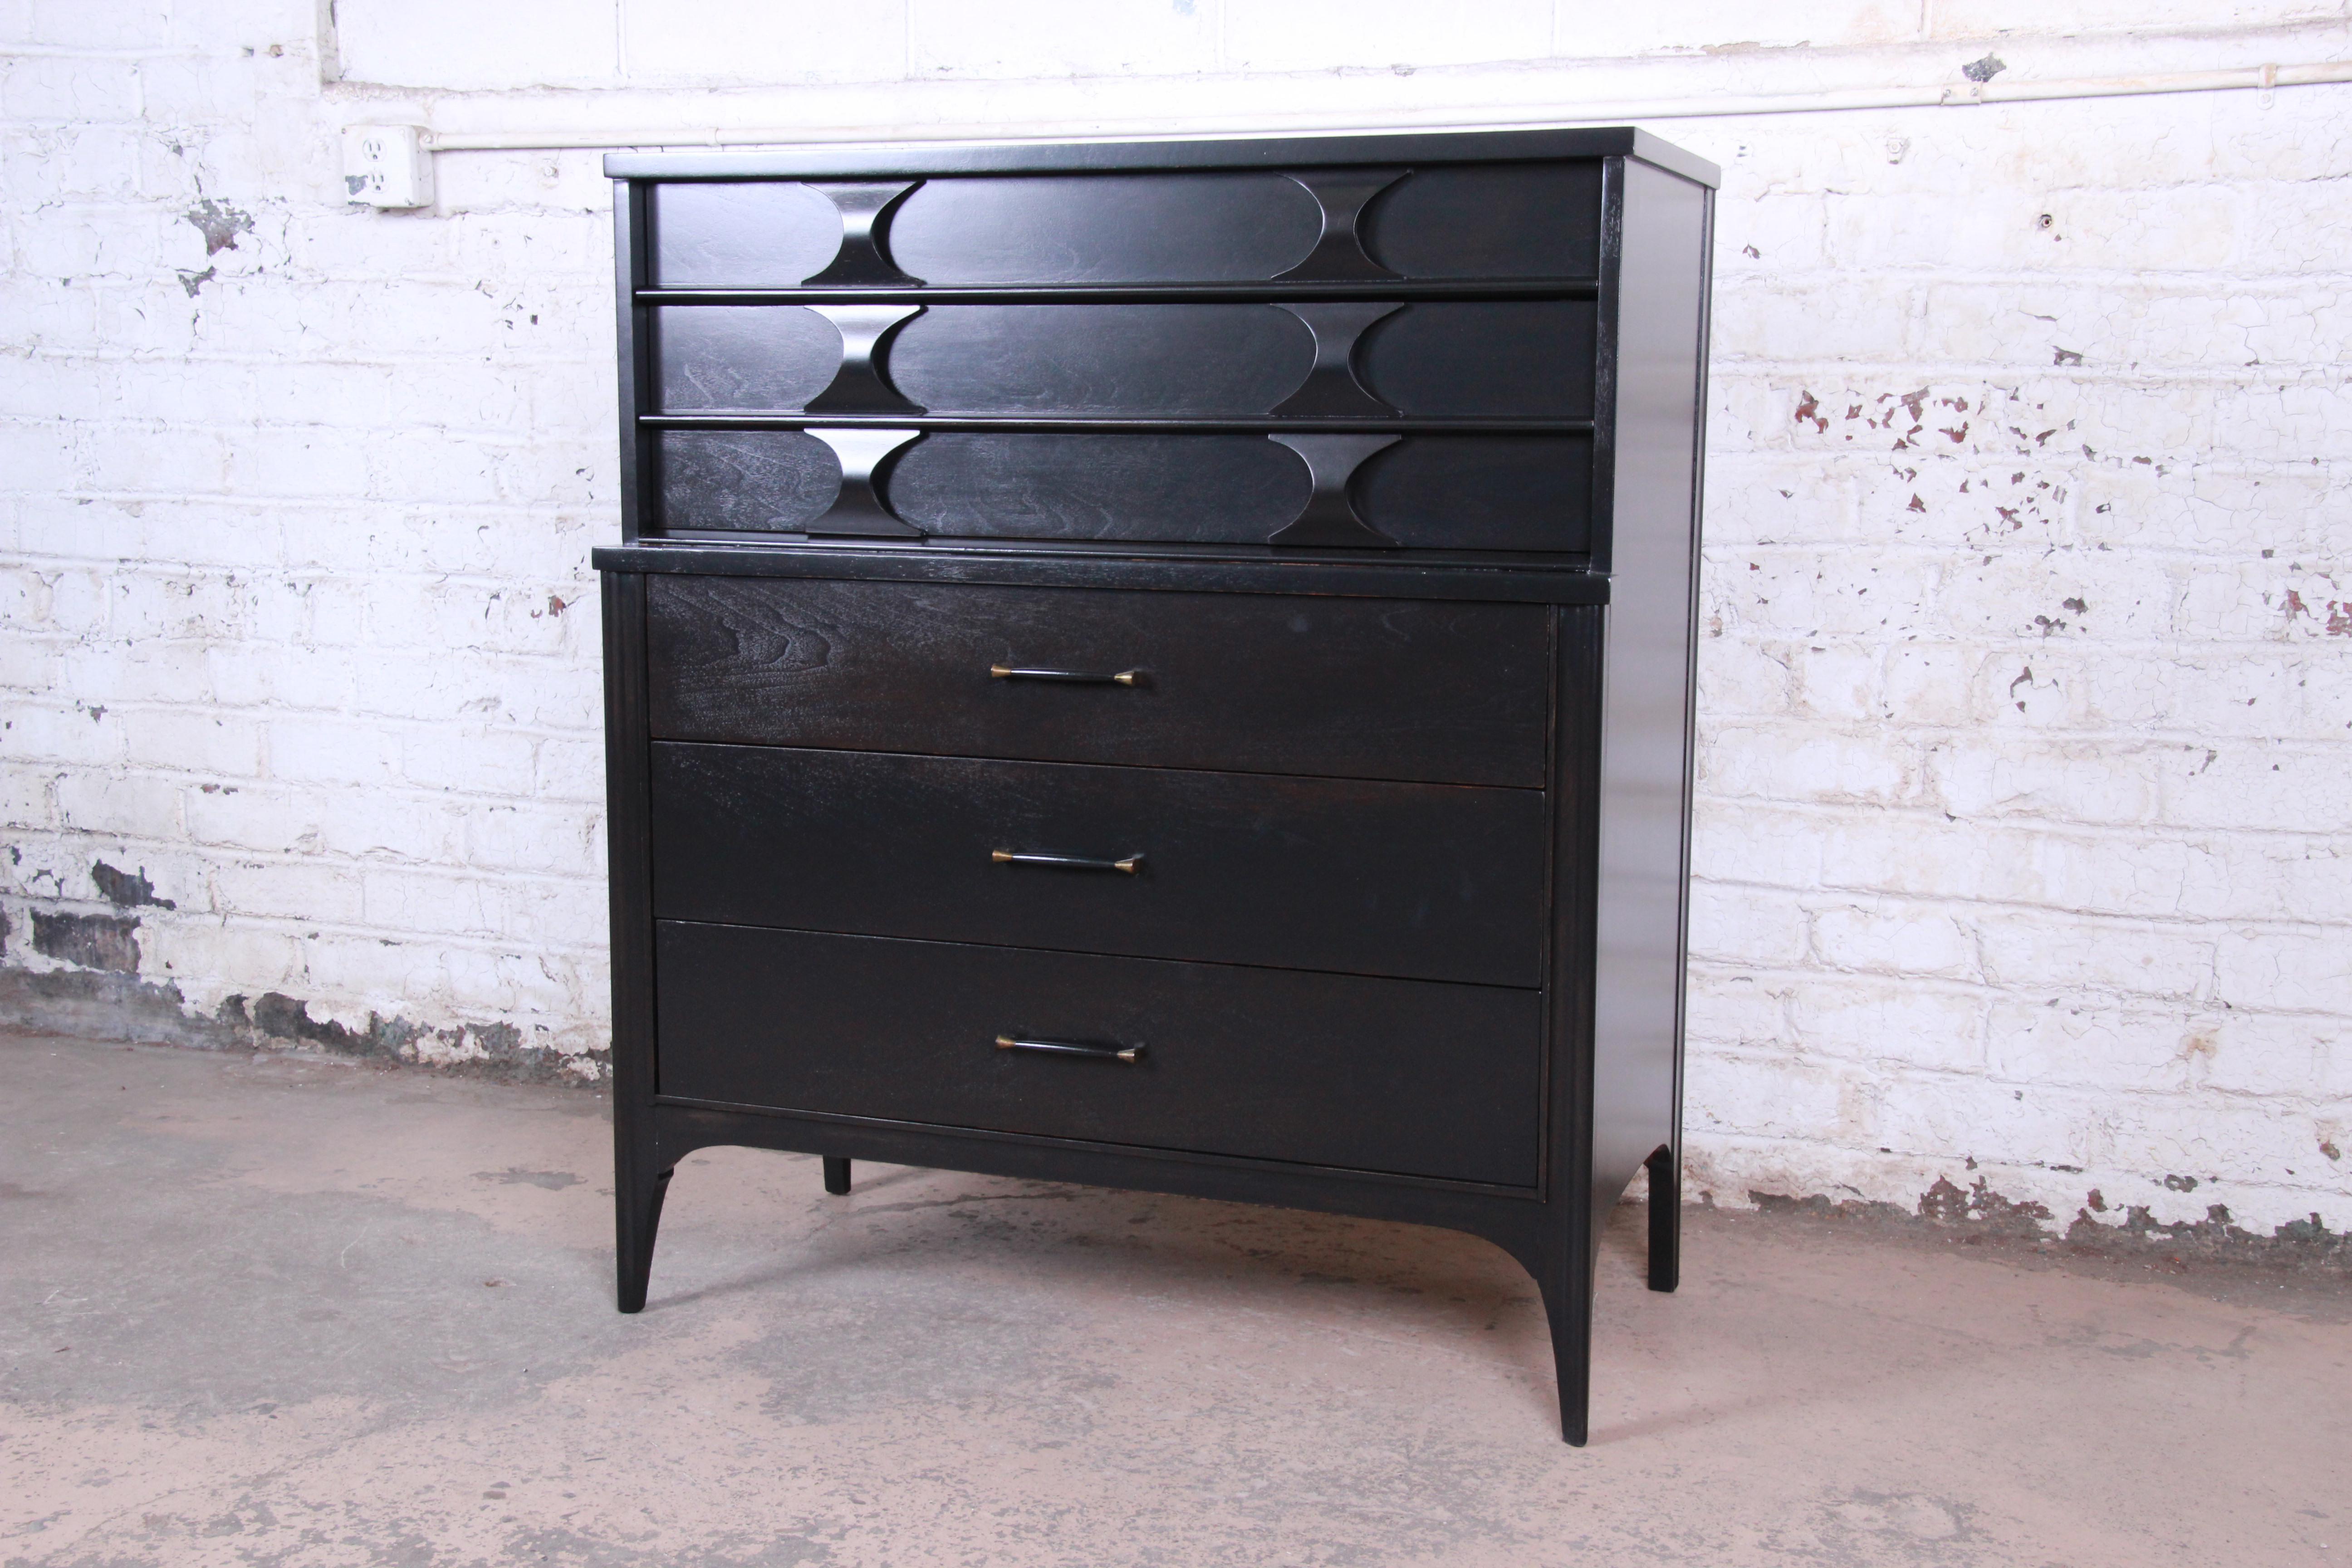 A gorgeous Mid-Century Modern sculpted walnut highboy dresser from the Perspecta line by Kent Coffey. The dresser features beautiful walnut wood grain with a newly ebonized finish. It offers great storage, with five deep dovetailed drawers. The